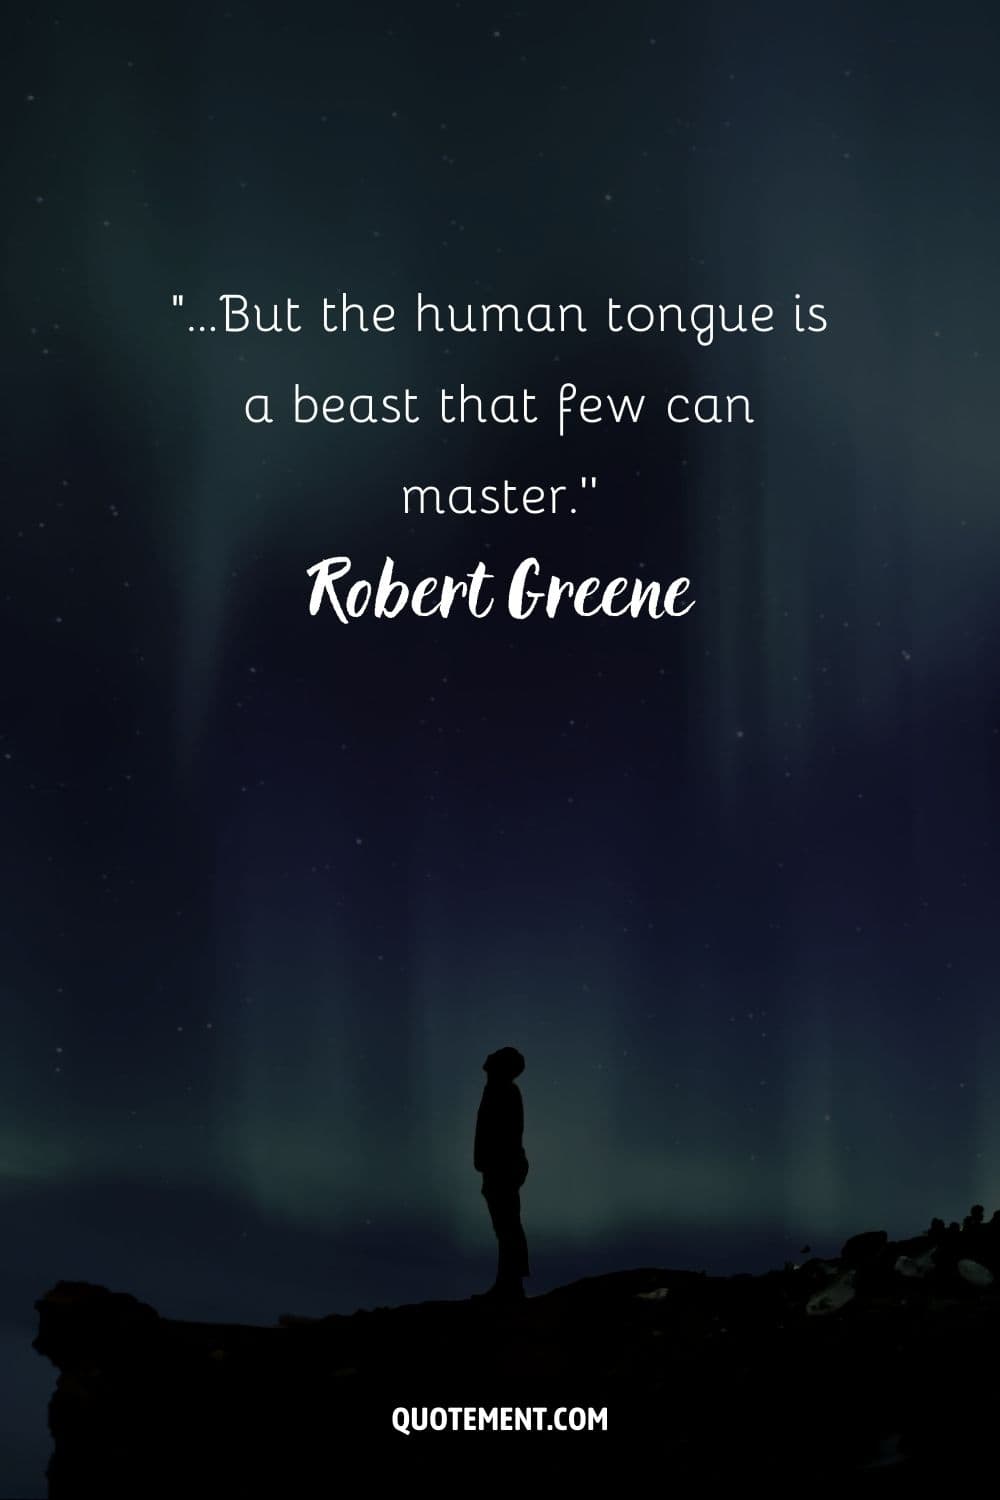 “...But the human tongue is a beast that few can master.’’ ― Robert Greene, The 48 Laws of Power